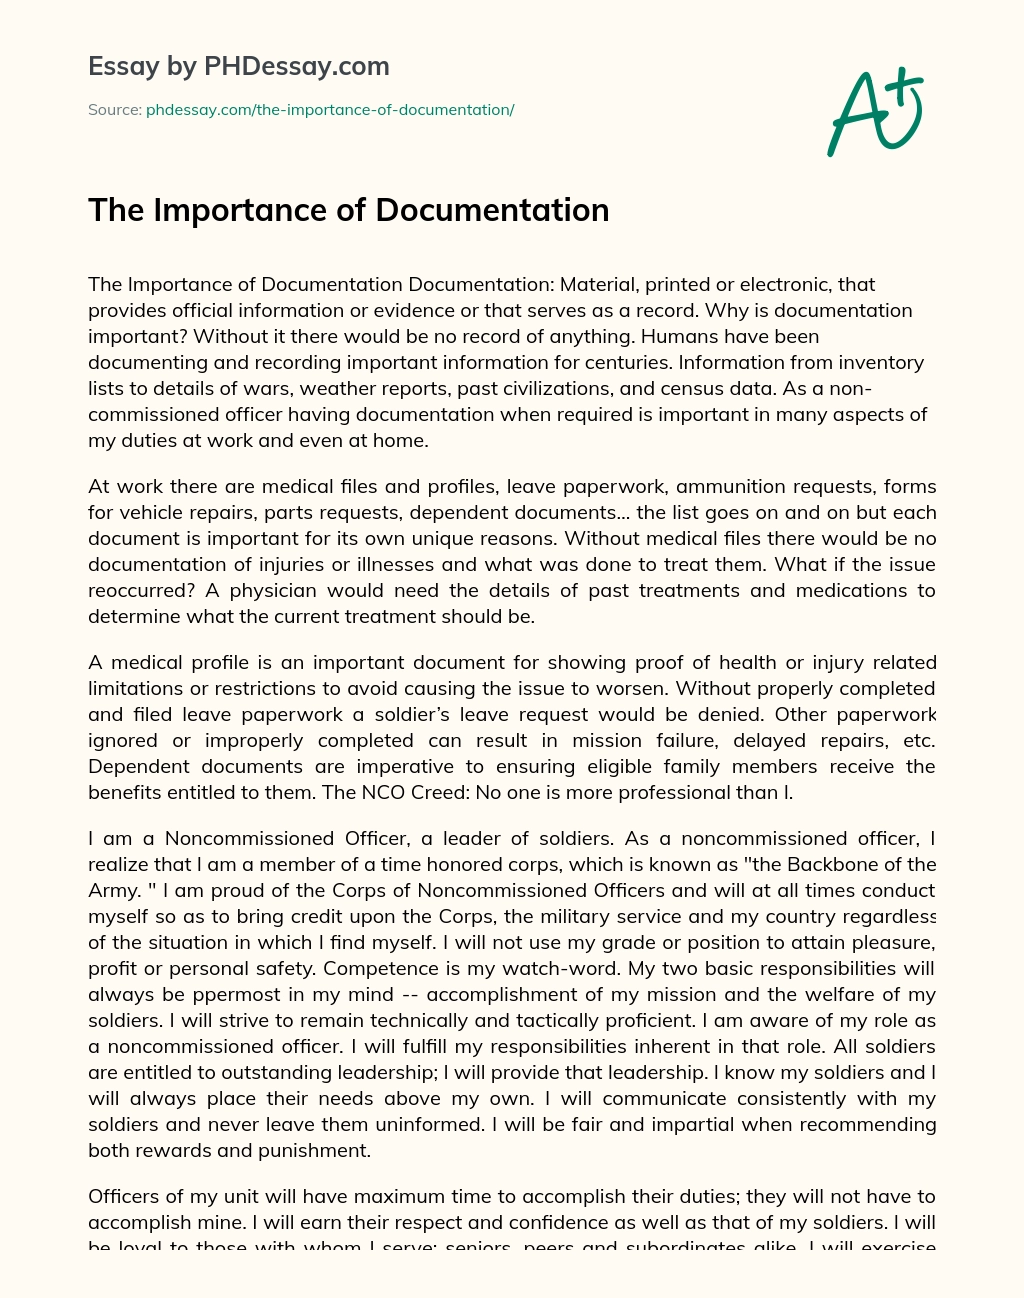 The Importance of Documentation essay